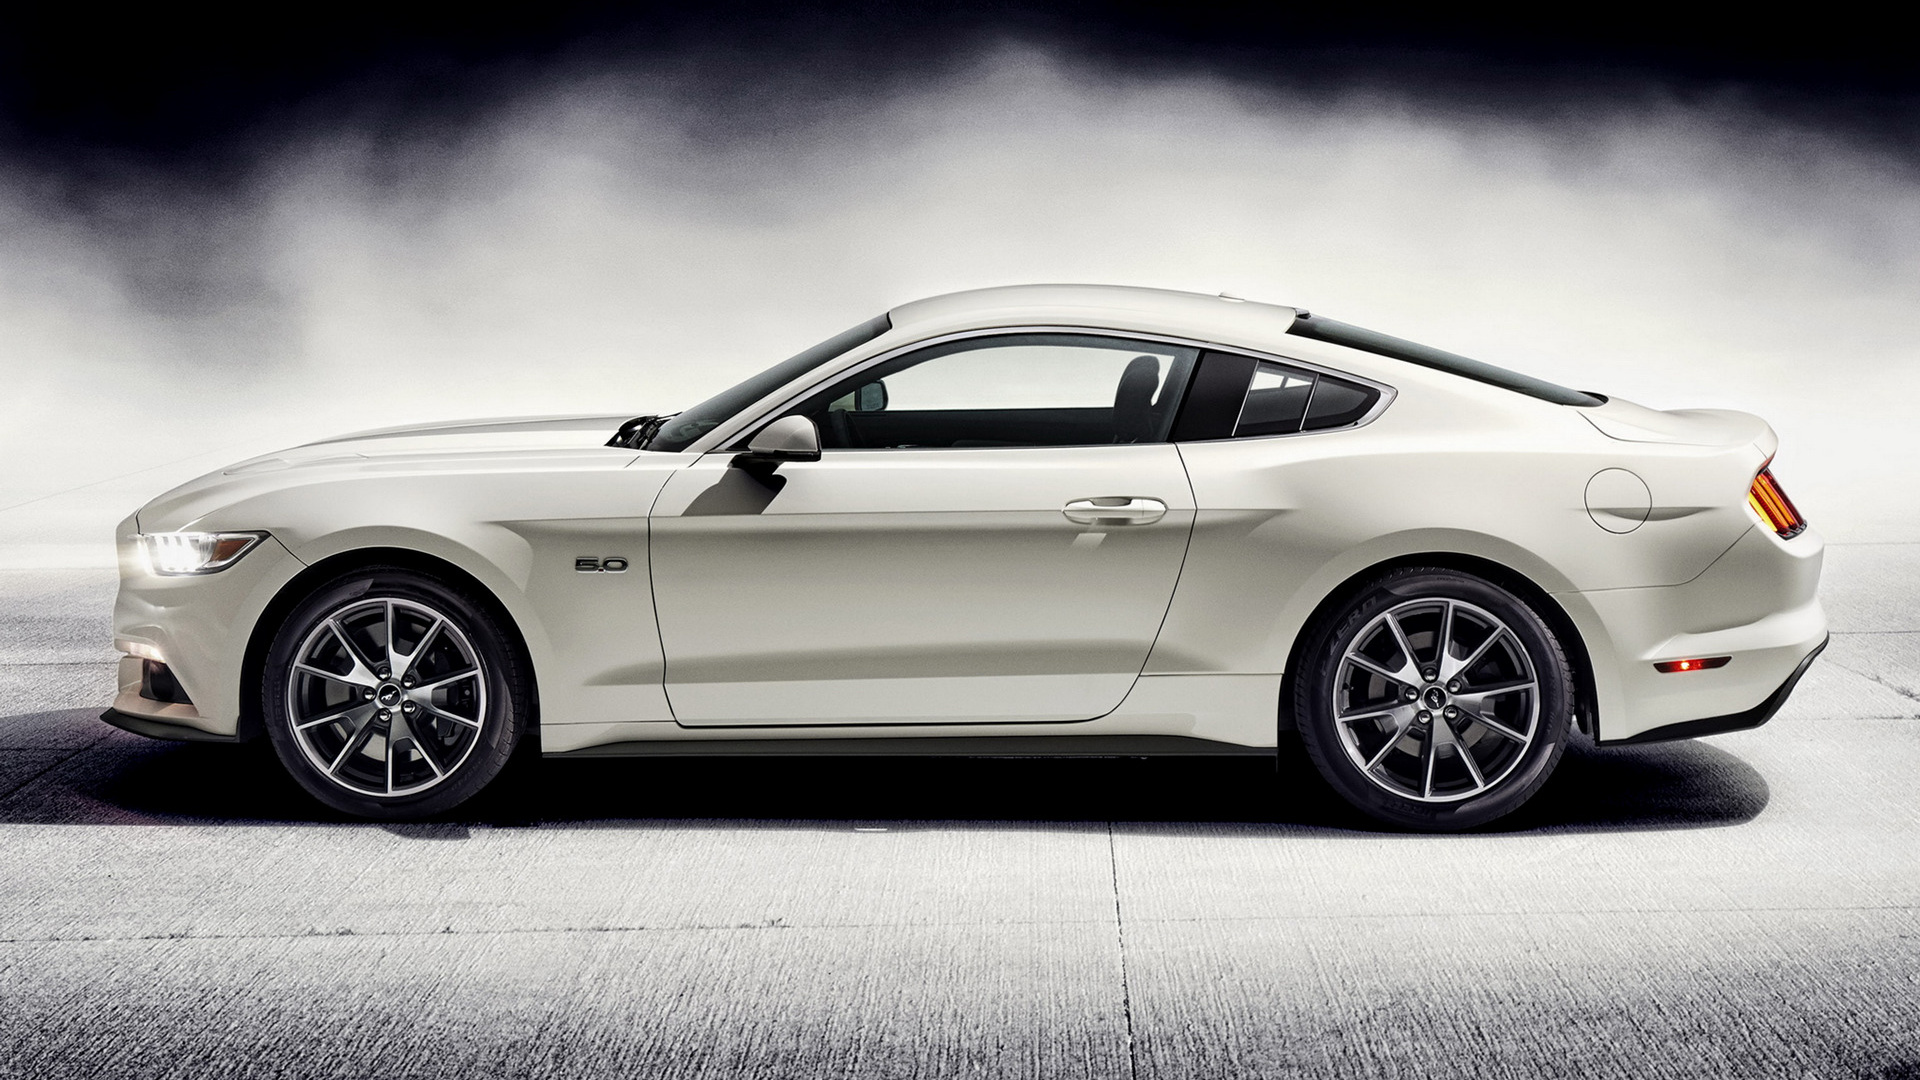 Car Coupe Ford Mustang Gt 50 Years Edition Muscle Car White Car 1920x1080